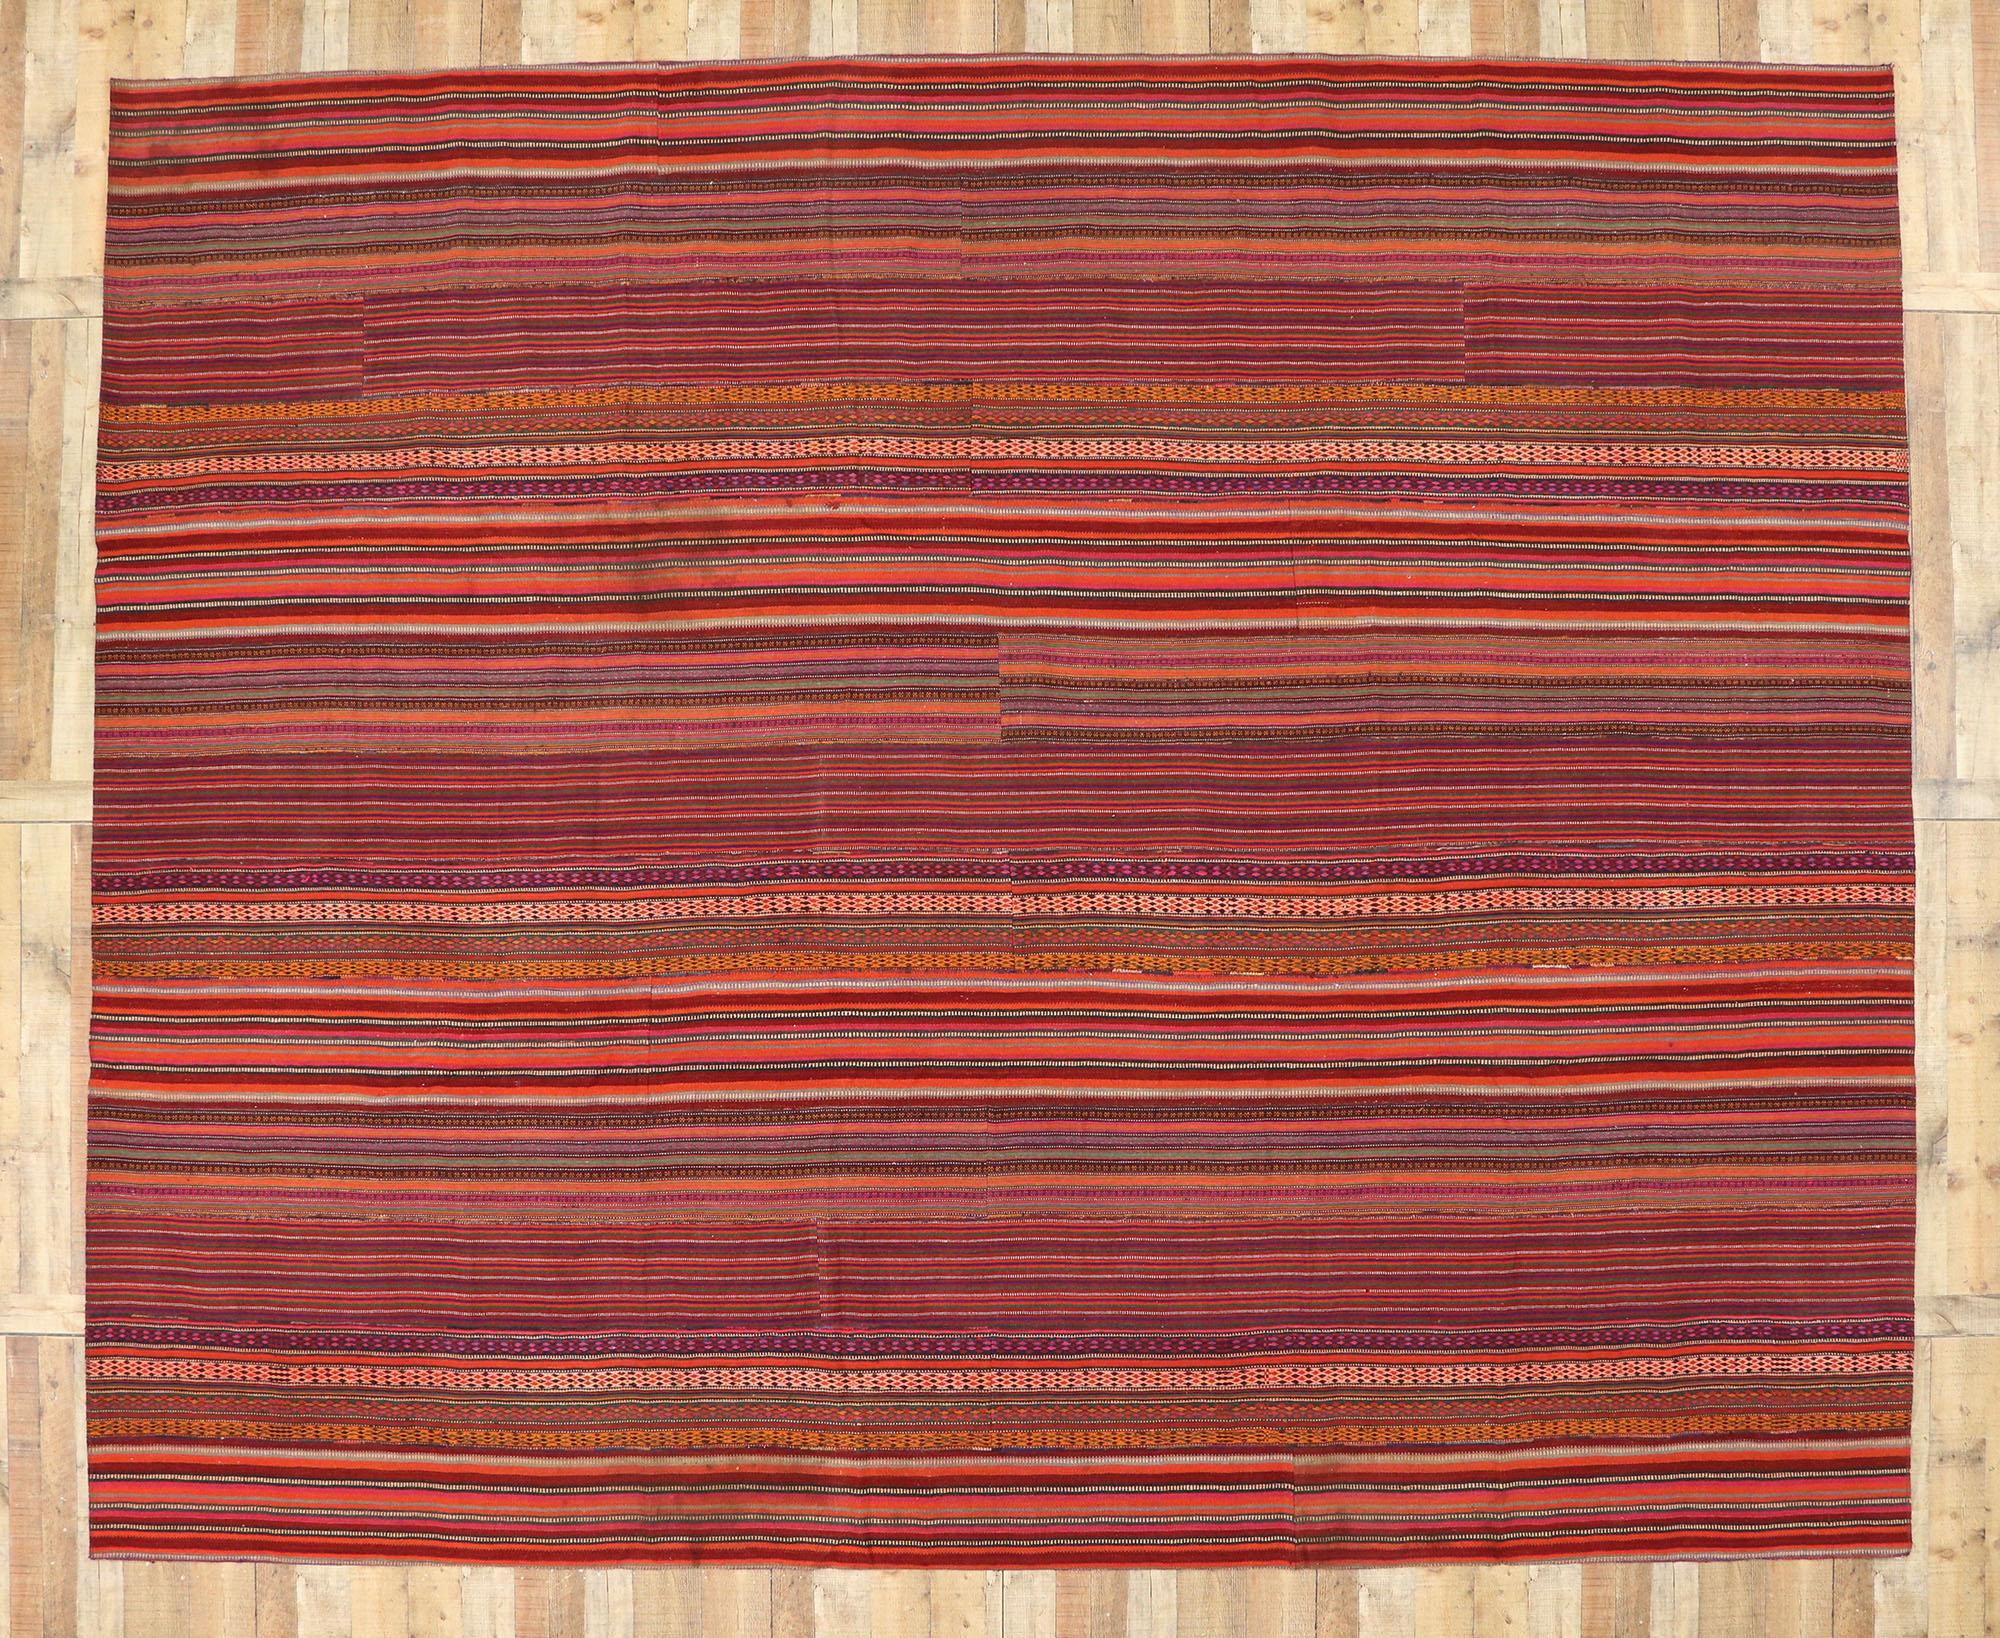 Vintage Turkish Striped Kilim Rug with Modern Rustic Cabin Style  4